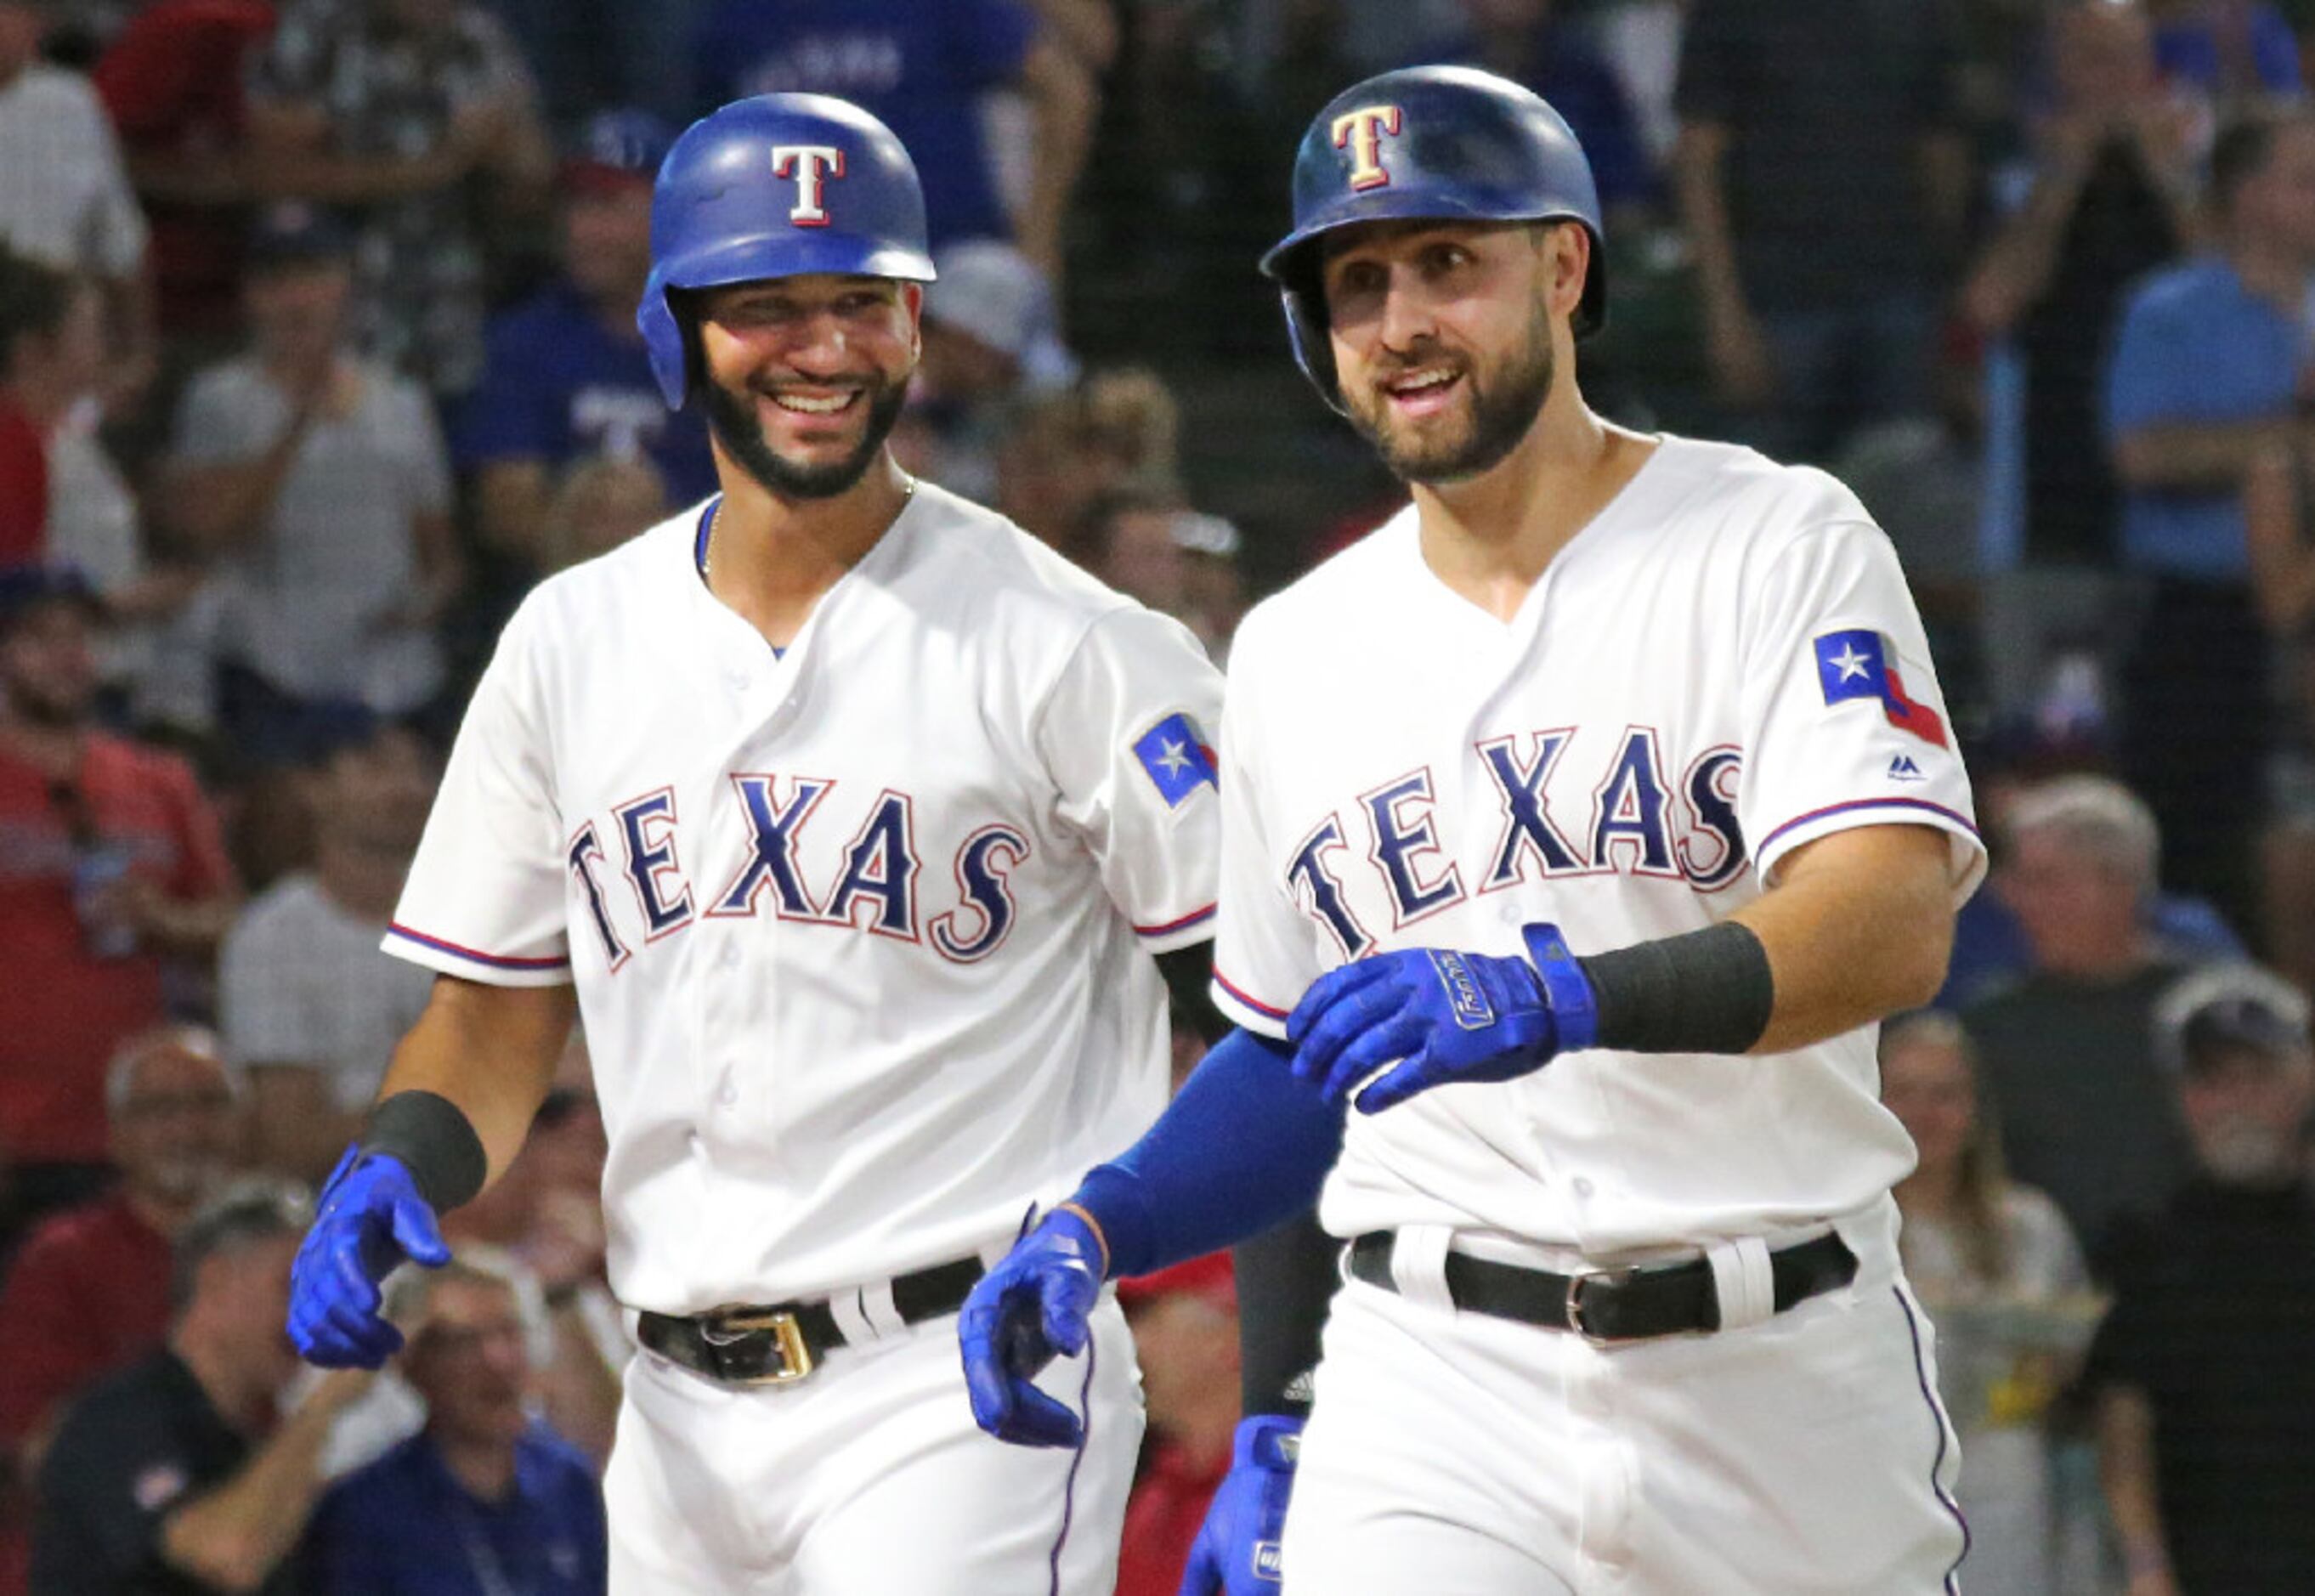 PHOTOS: Joey Gallo, Nomar Mazara and other Rangers pass out Thanksgiving  meals to families in need